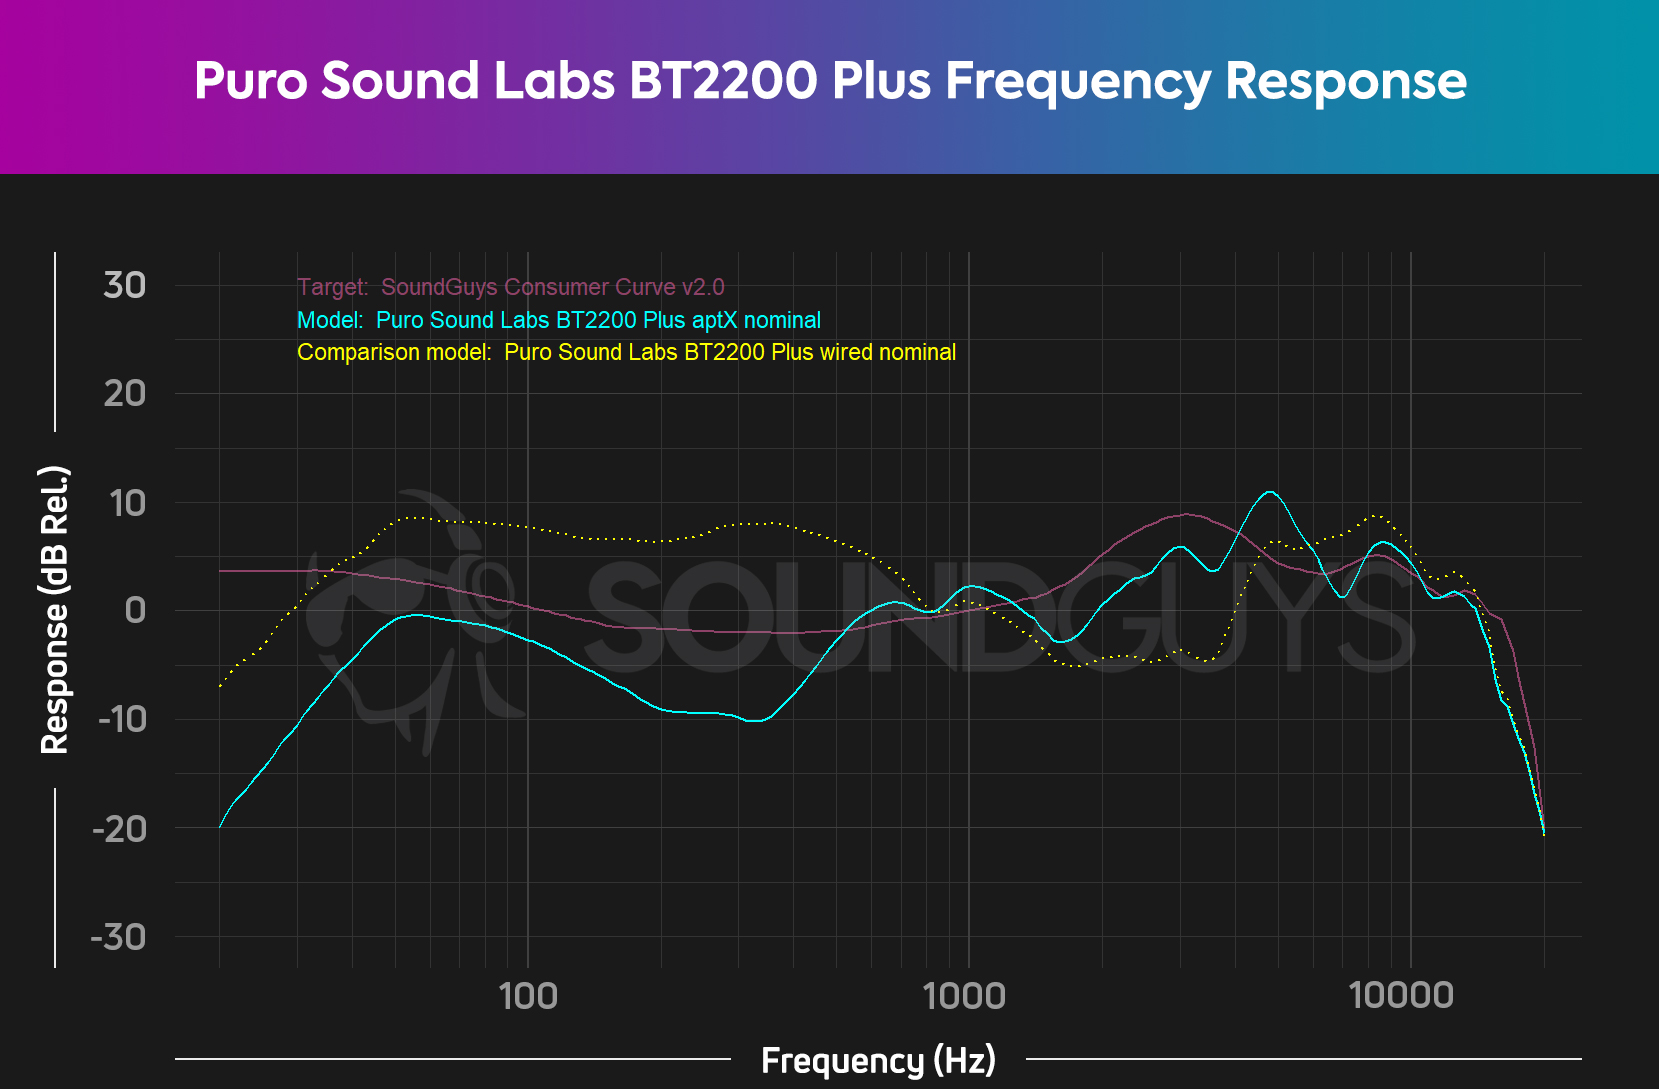 A chart showing how divergent the frequency responses for the Puro Sound Labs BT2200 Plus are.